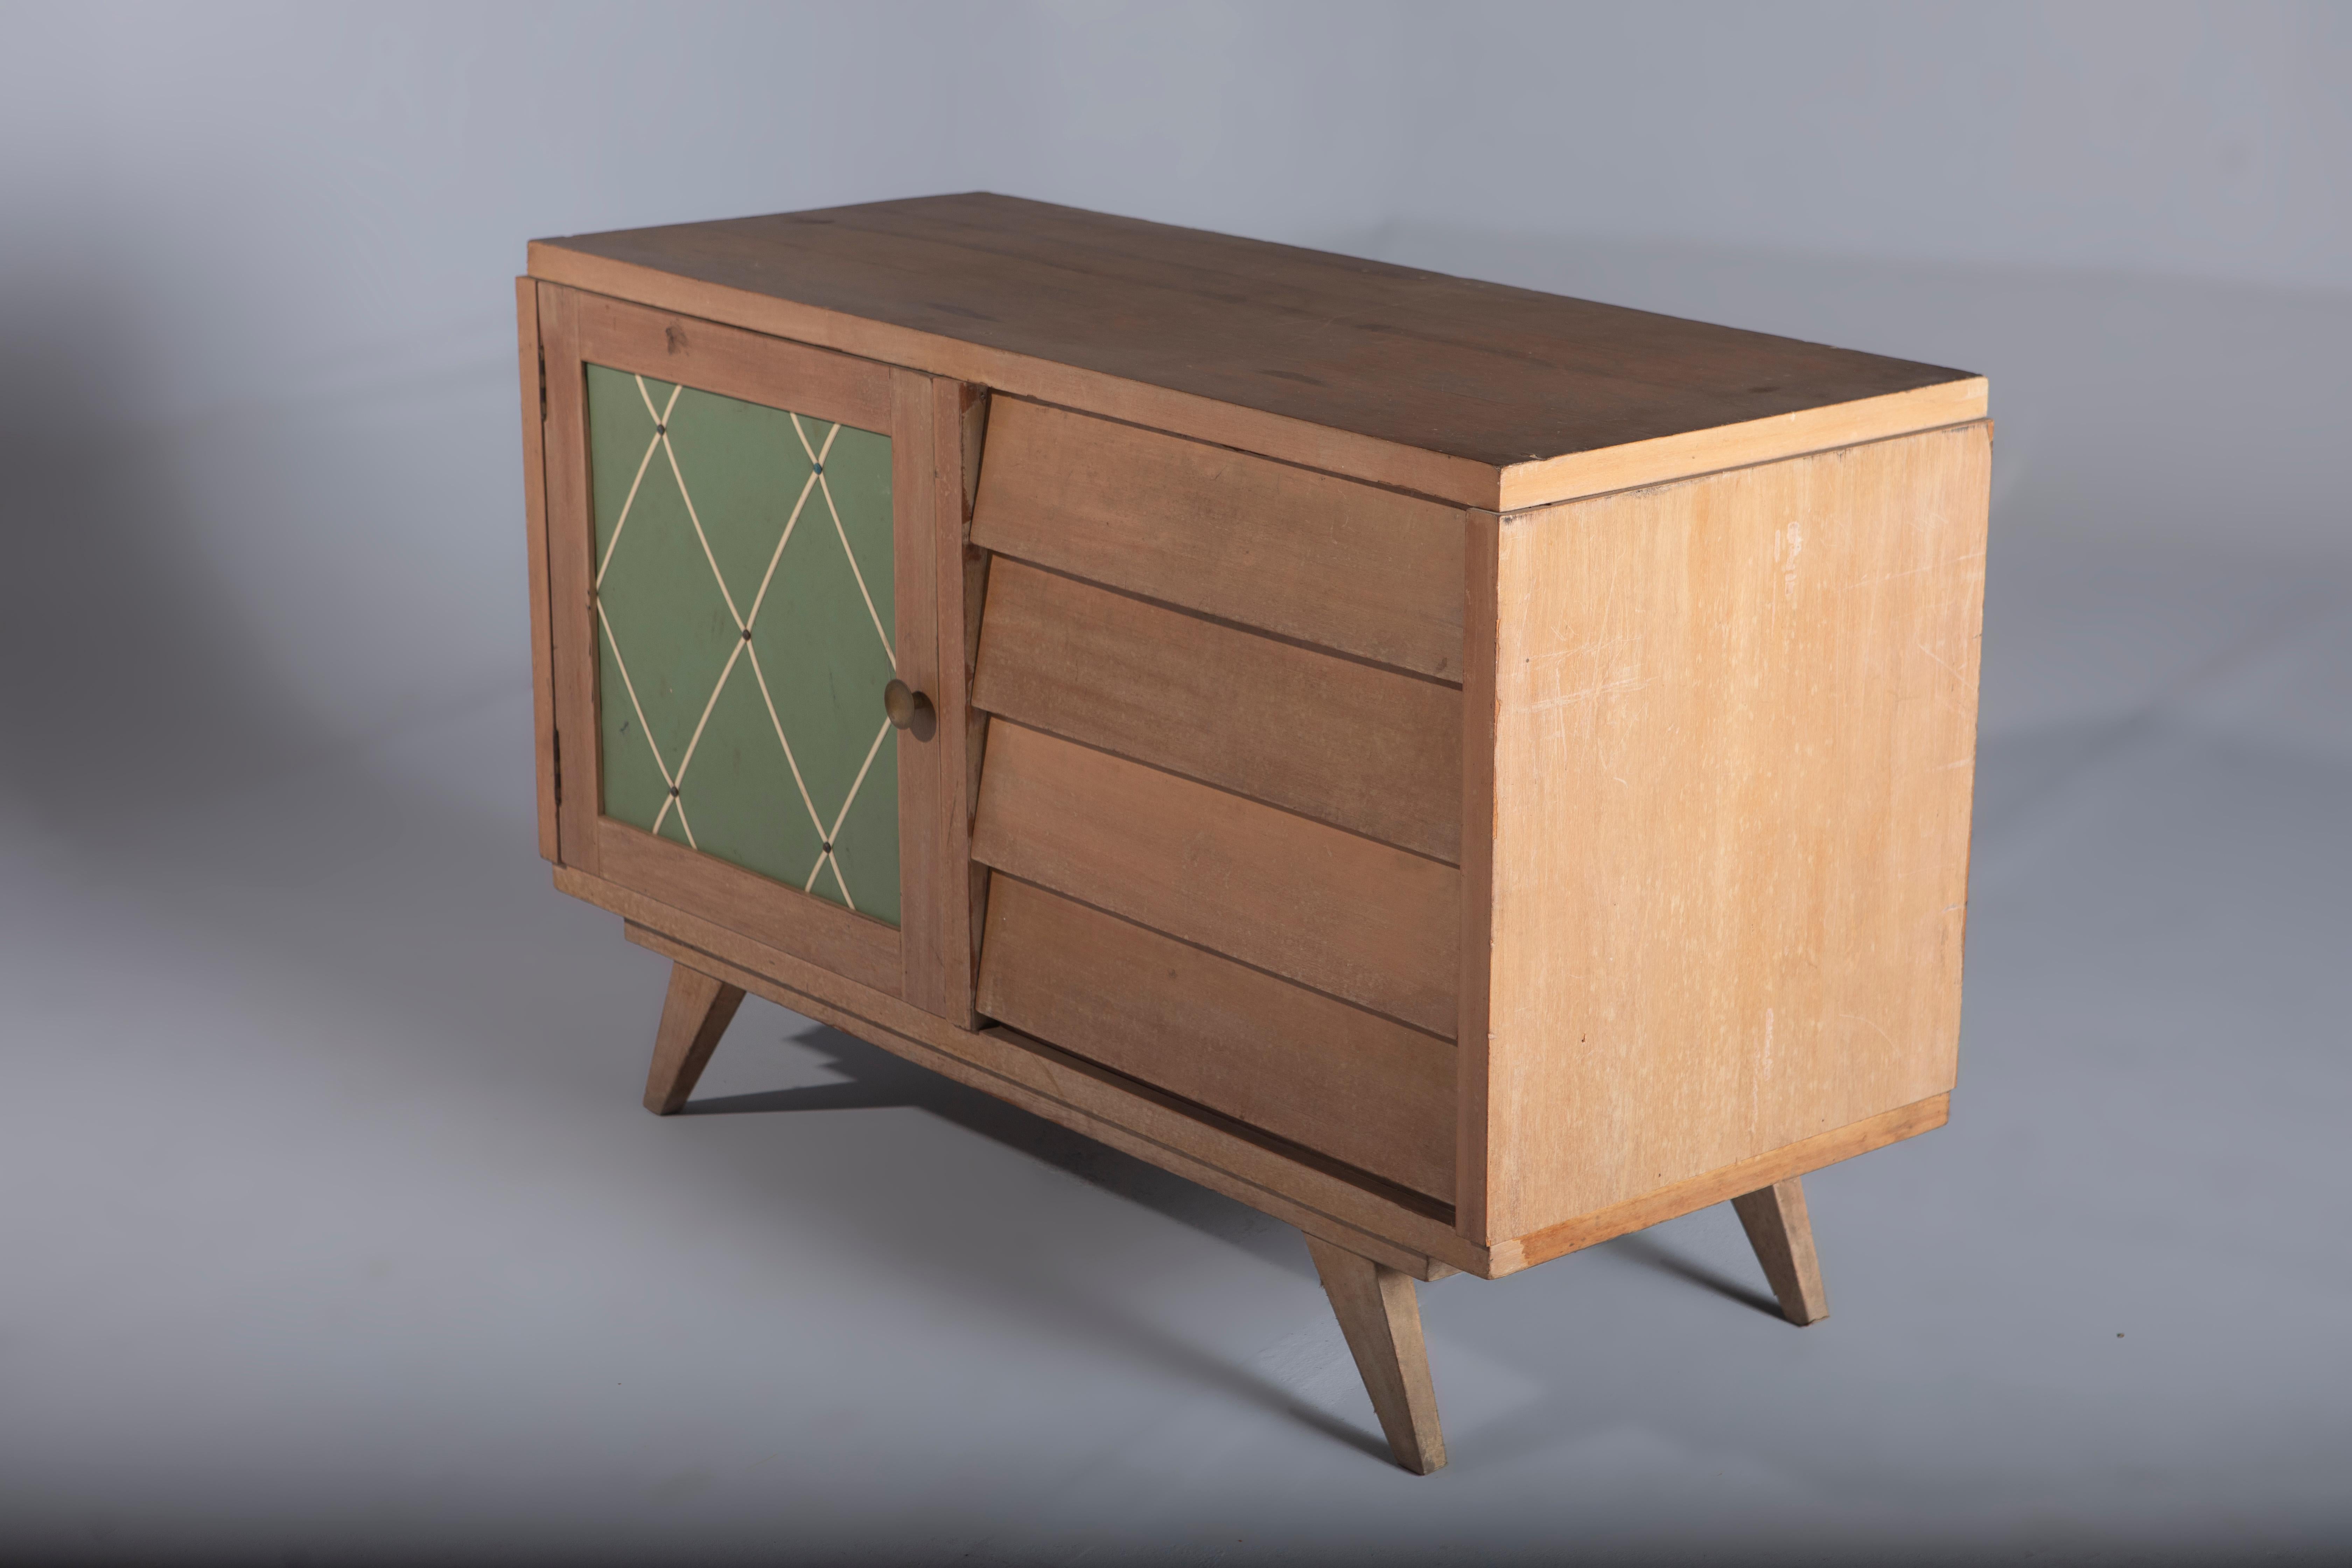 Mid-Century Modern Cabinet by Zanine Caldas, Brazil, 1950s

Cabinet by the acclaimed Brazilian designer José Zanine Caldas, manufactured in the 1950s. Meticulously handcrafted, this cabinet reflects the designer's exceptional craftsmanship.

The